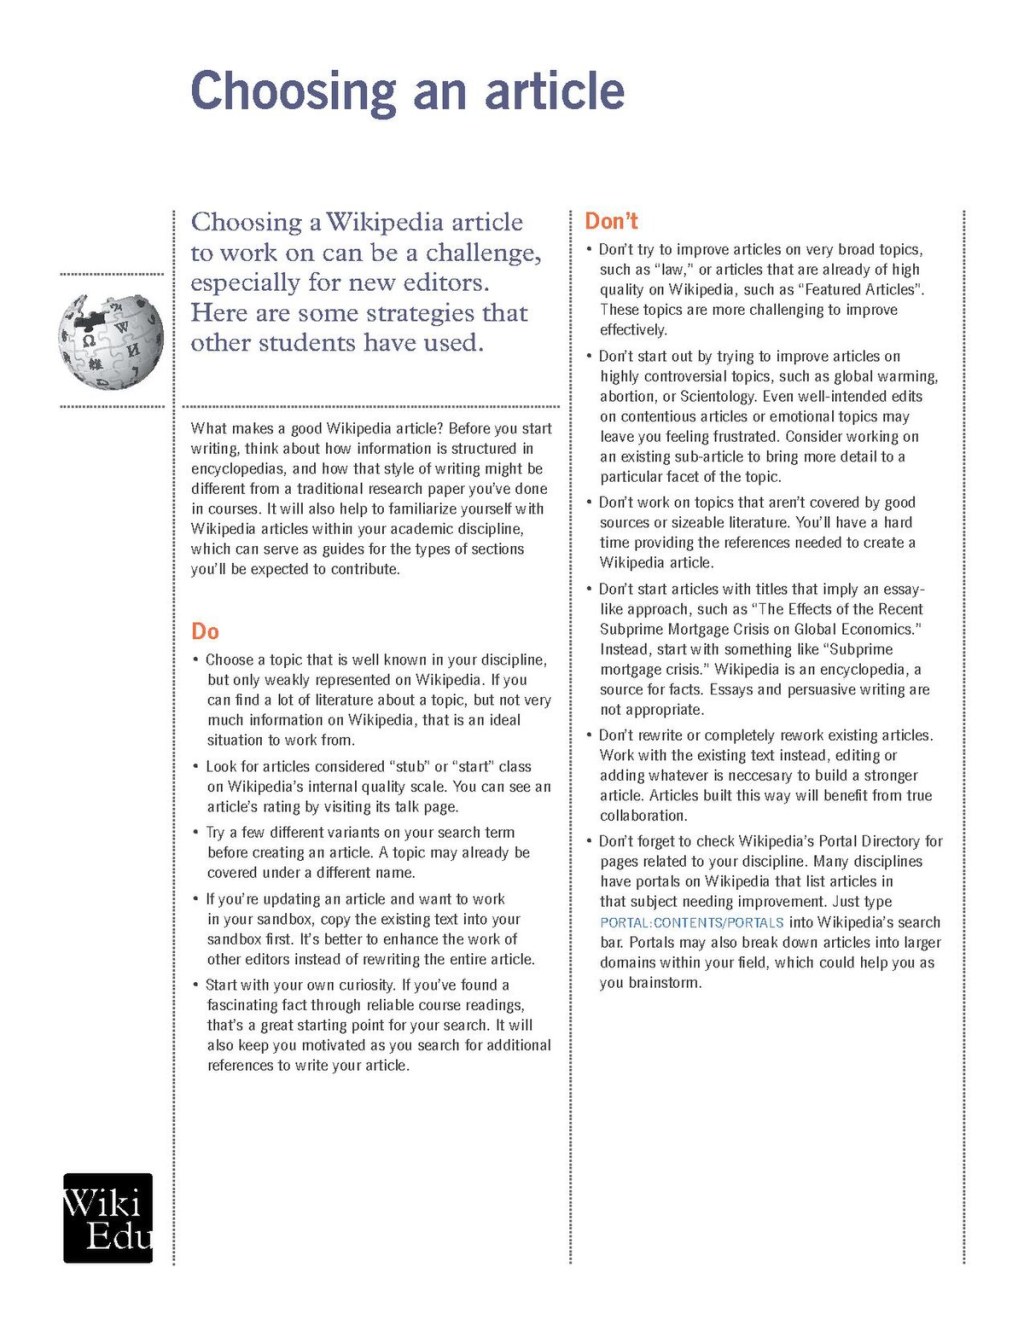 Picture of: File:Choosing an article